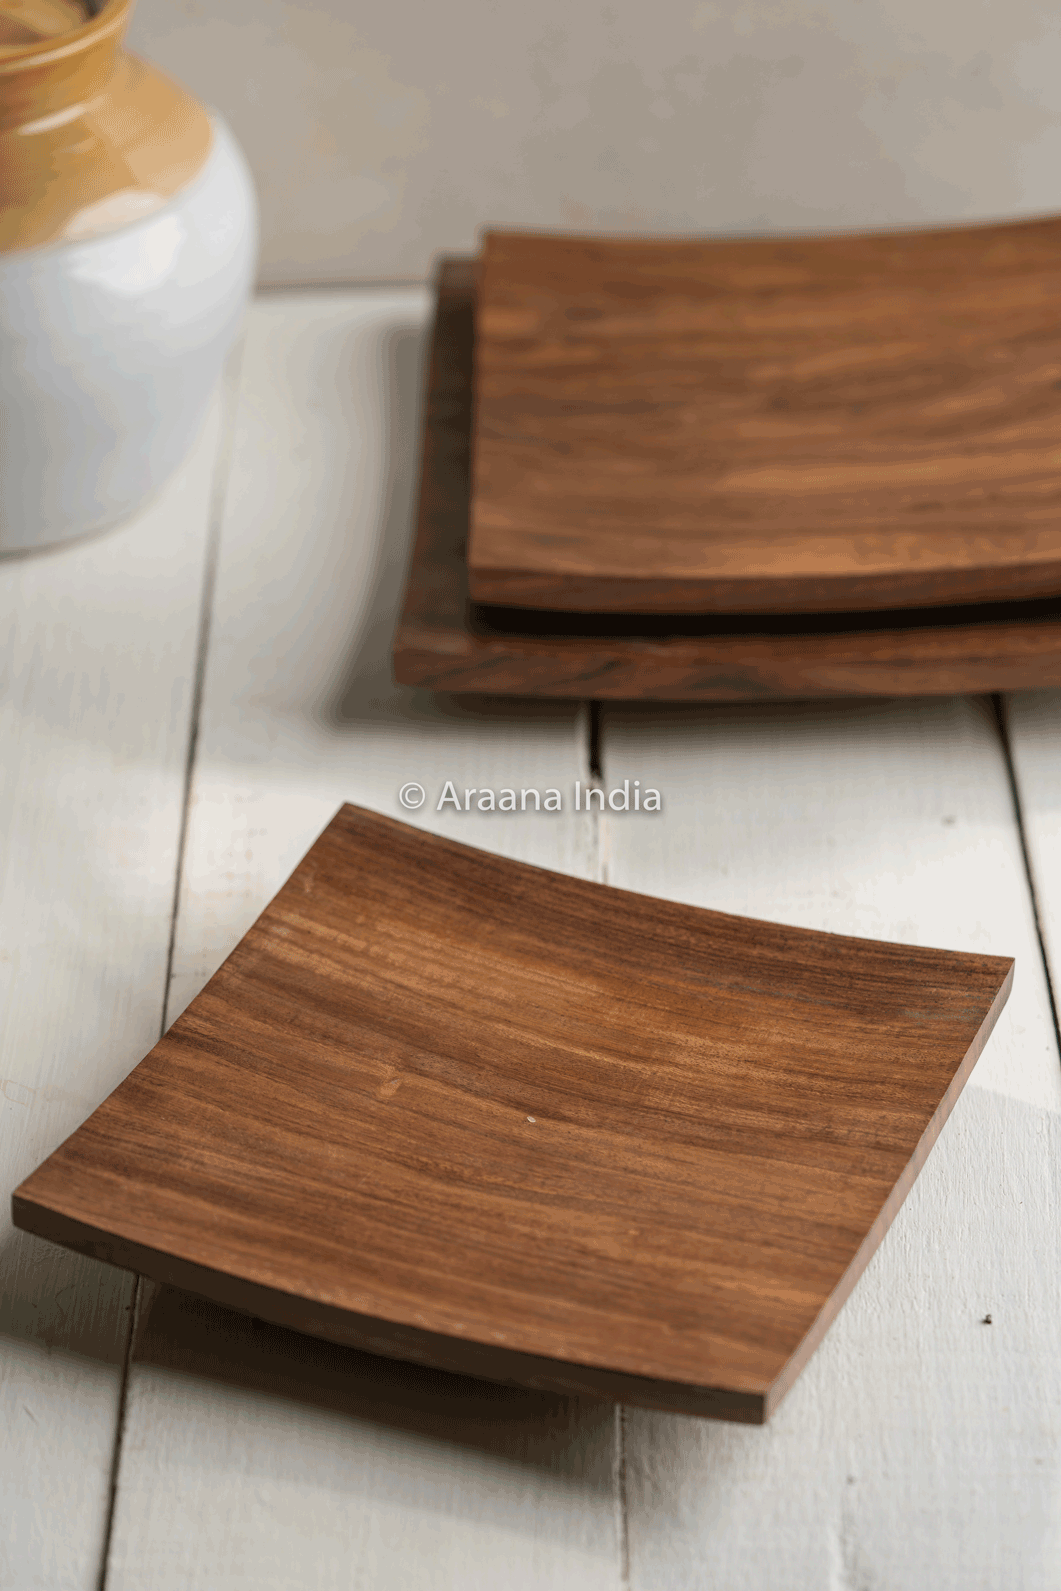 Thumbnail preview #4 for Mandhas - Set of 3 wooden platters